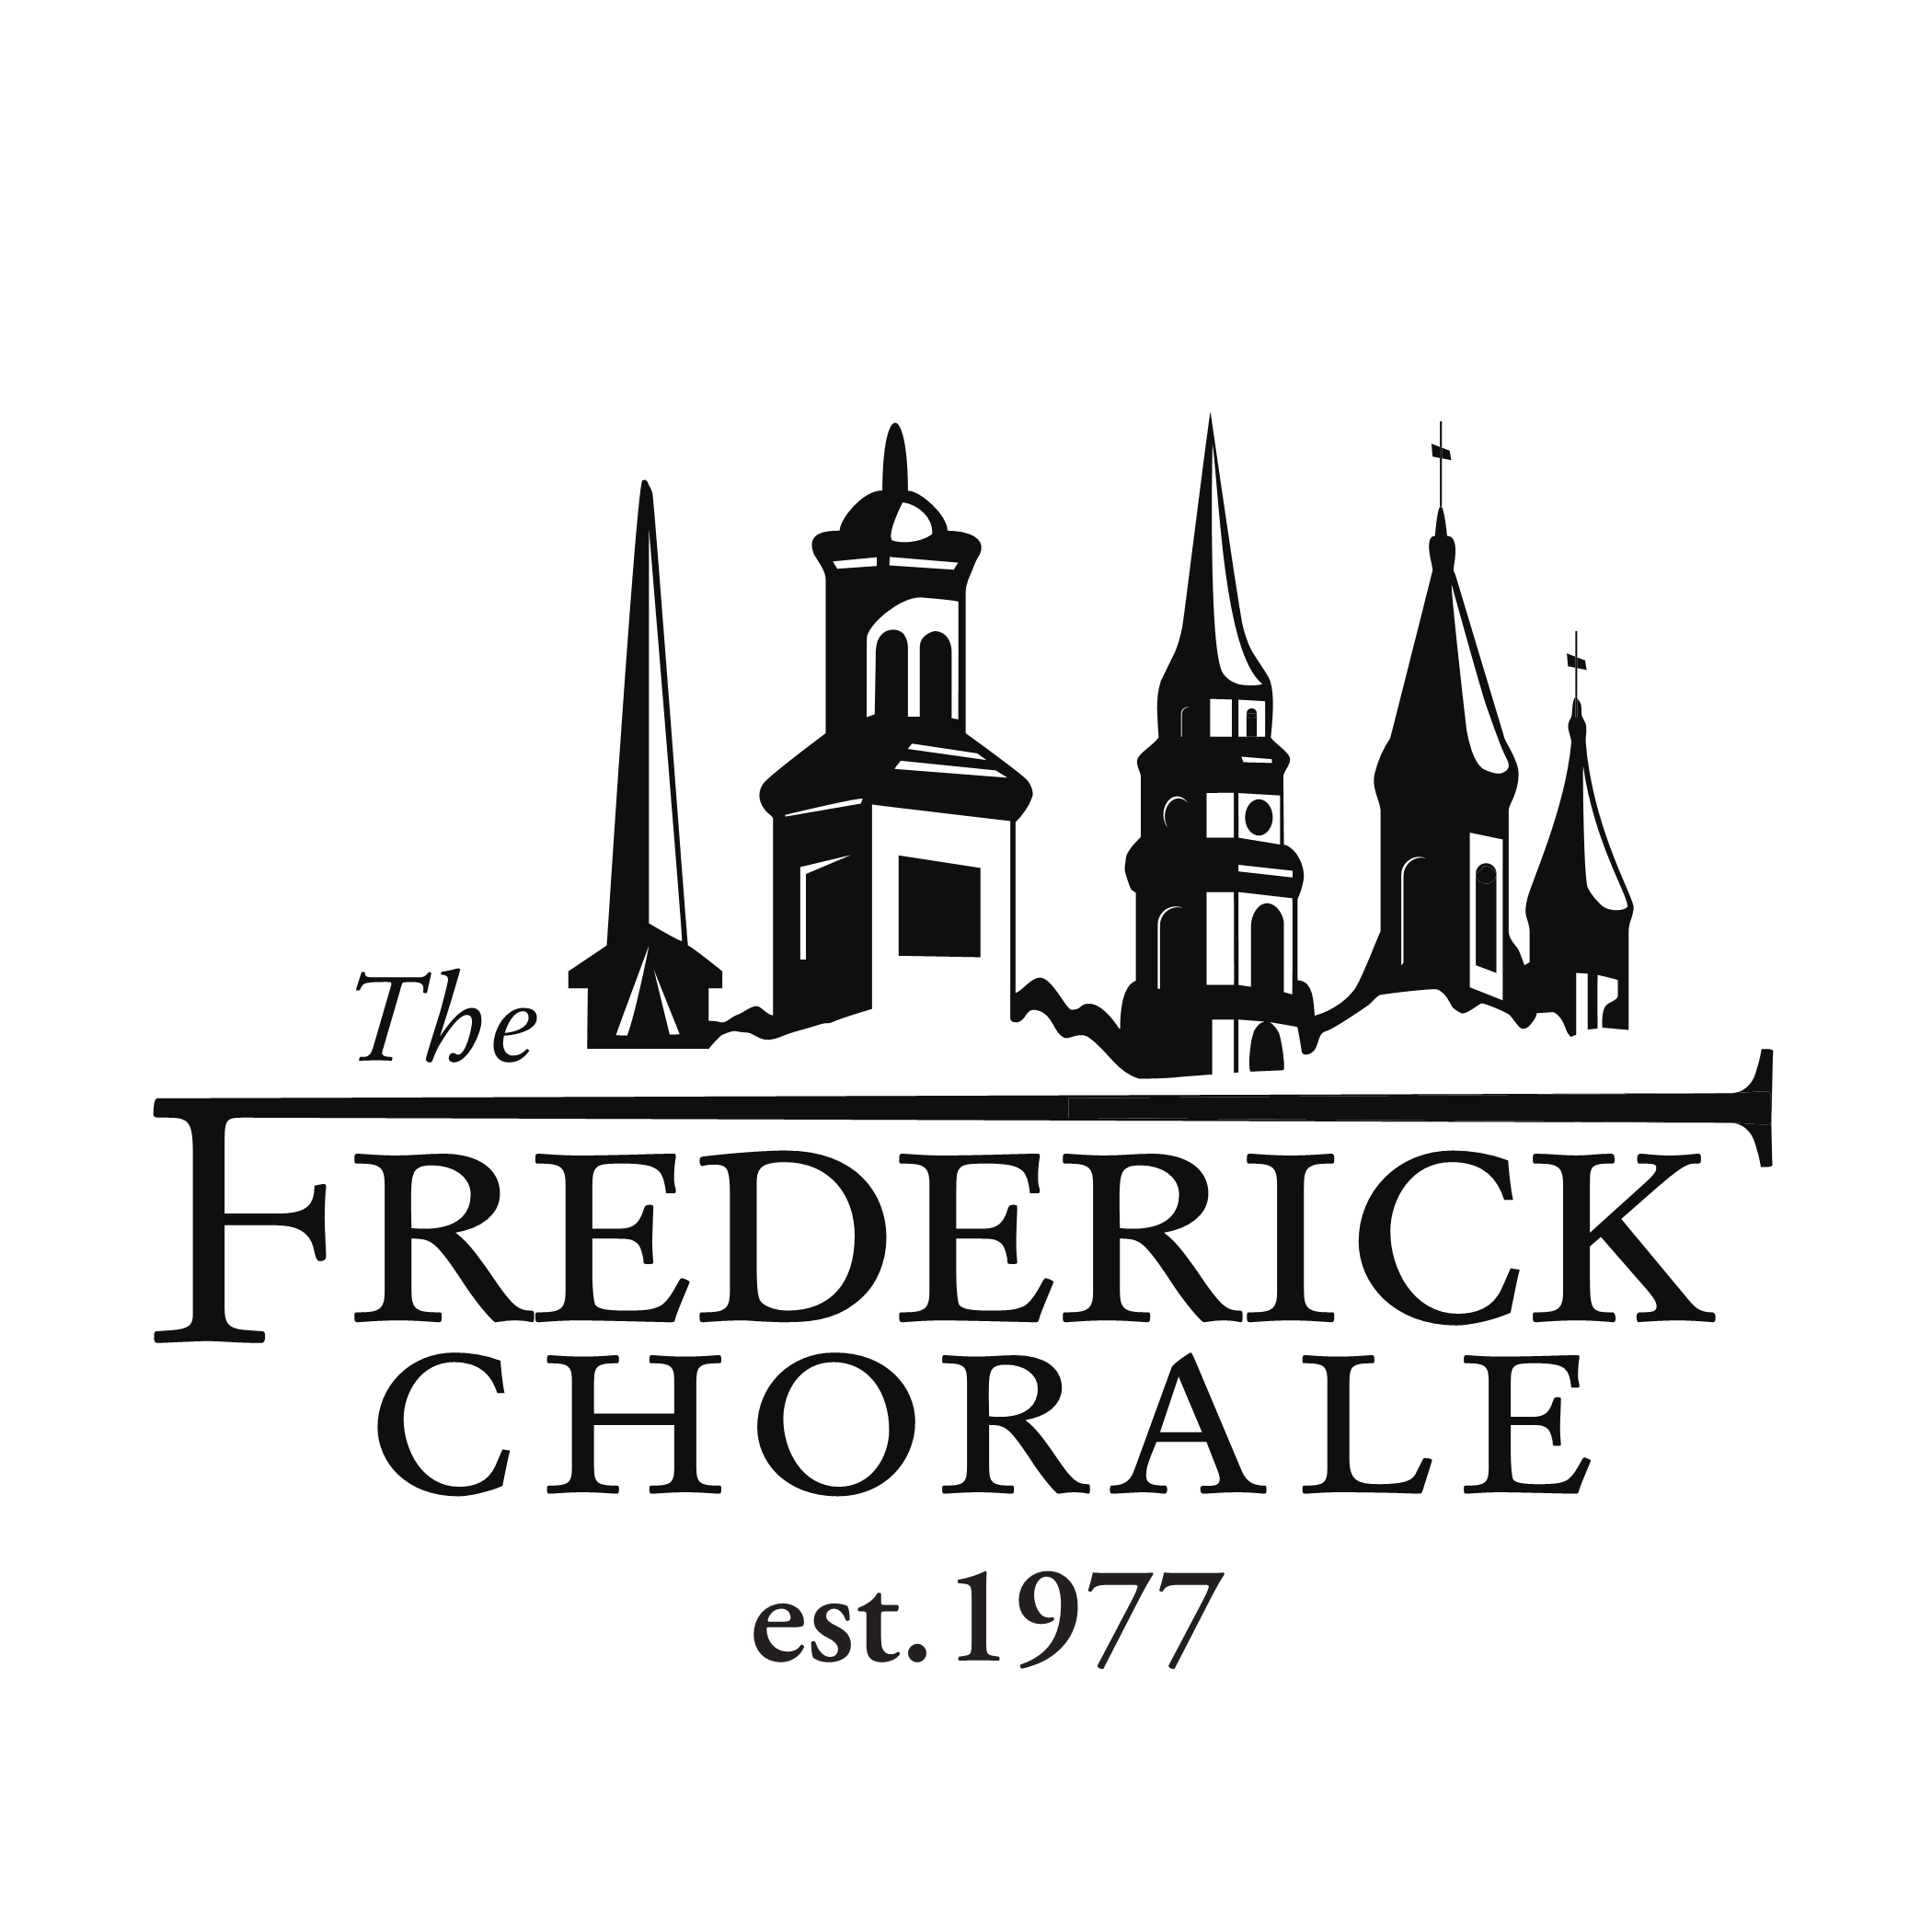 The Frederick Chorale